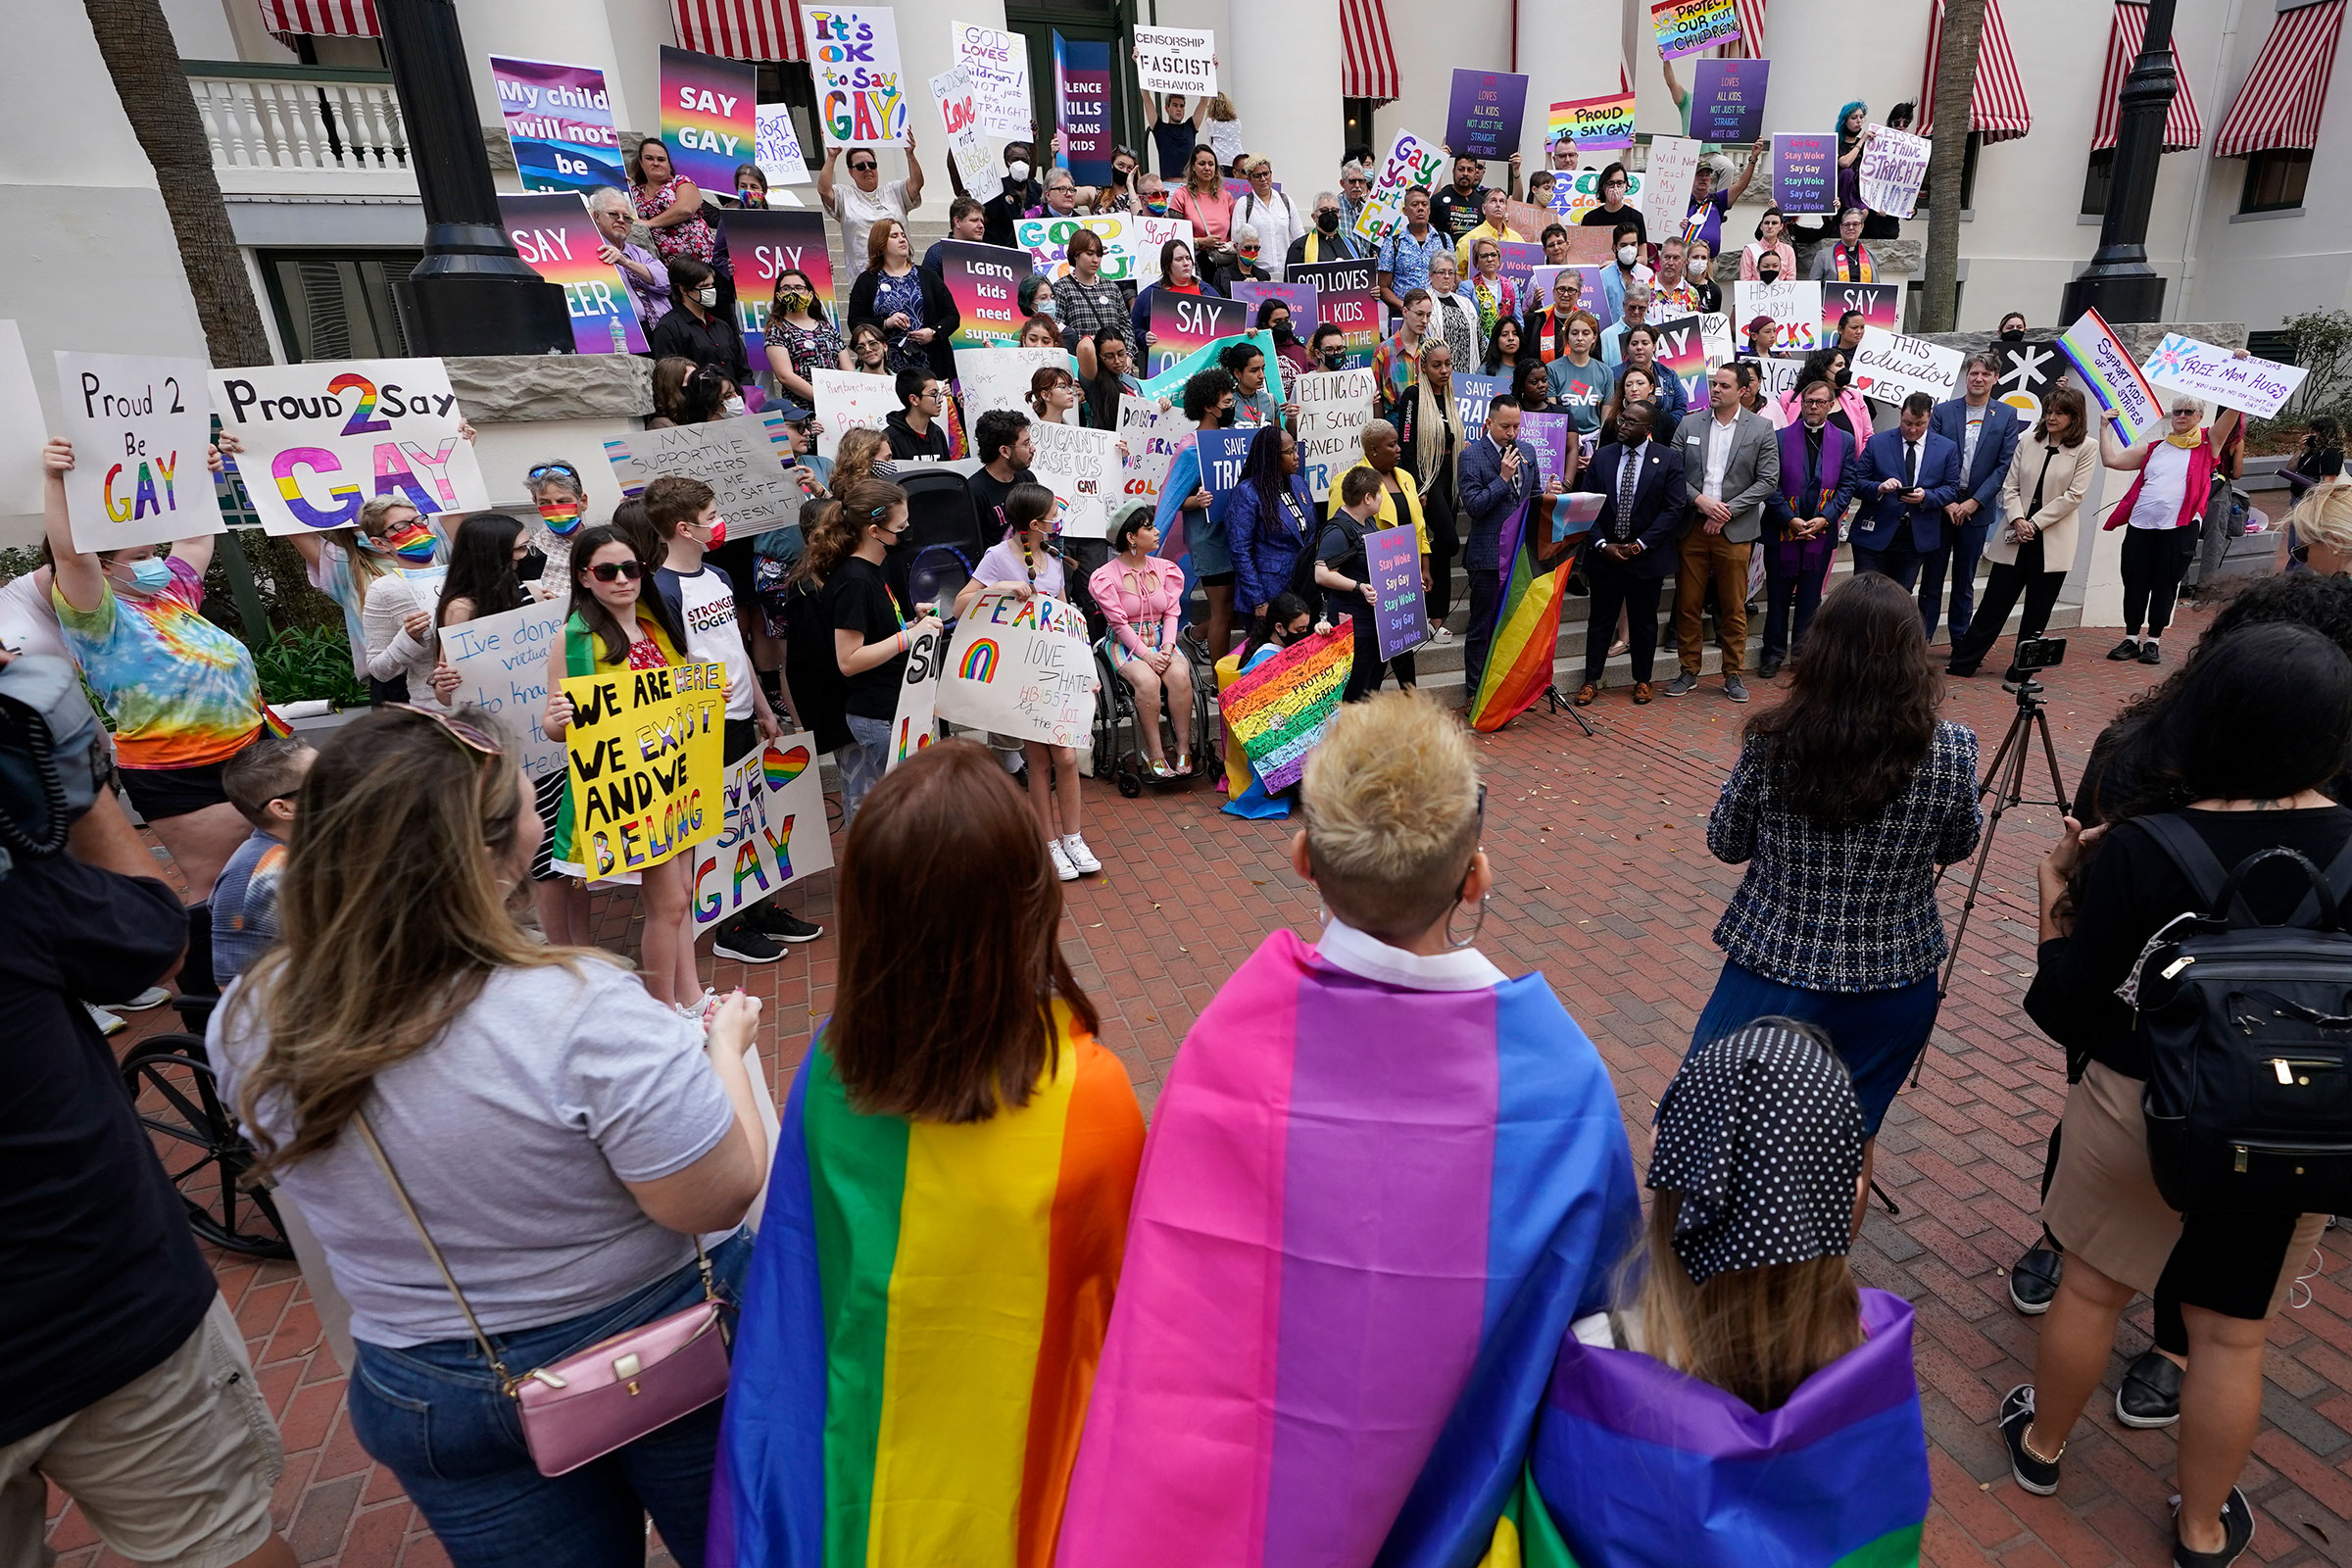 Demonstrators protesting the so-called "Don't Say Gay" bill gather on the steps of the Florida Historic Capitol Museum in front of the Florida State Capitol in Tallahassee, Fla. on March 7, 2022. (Wilfredo Lee—AP)